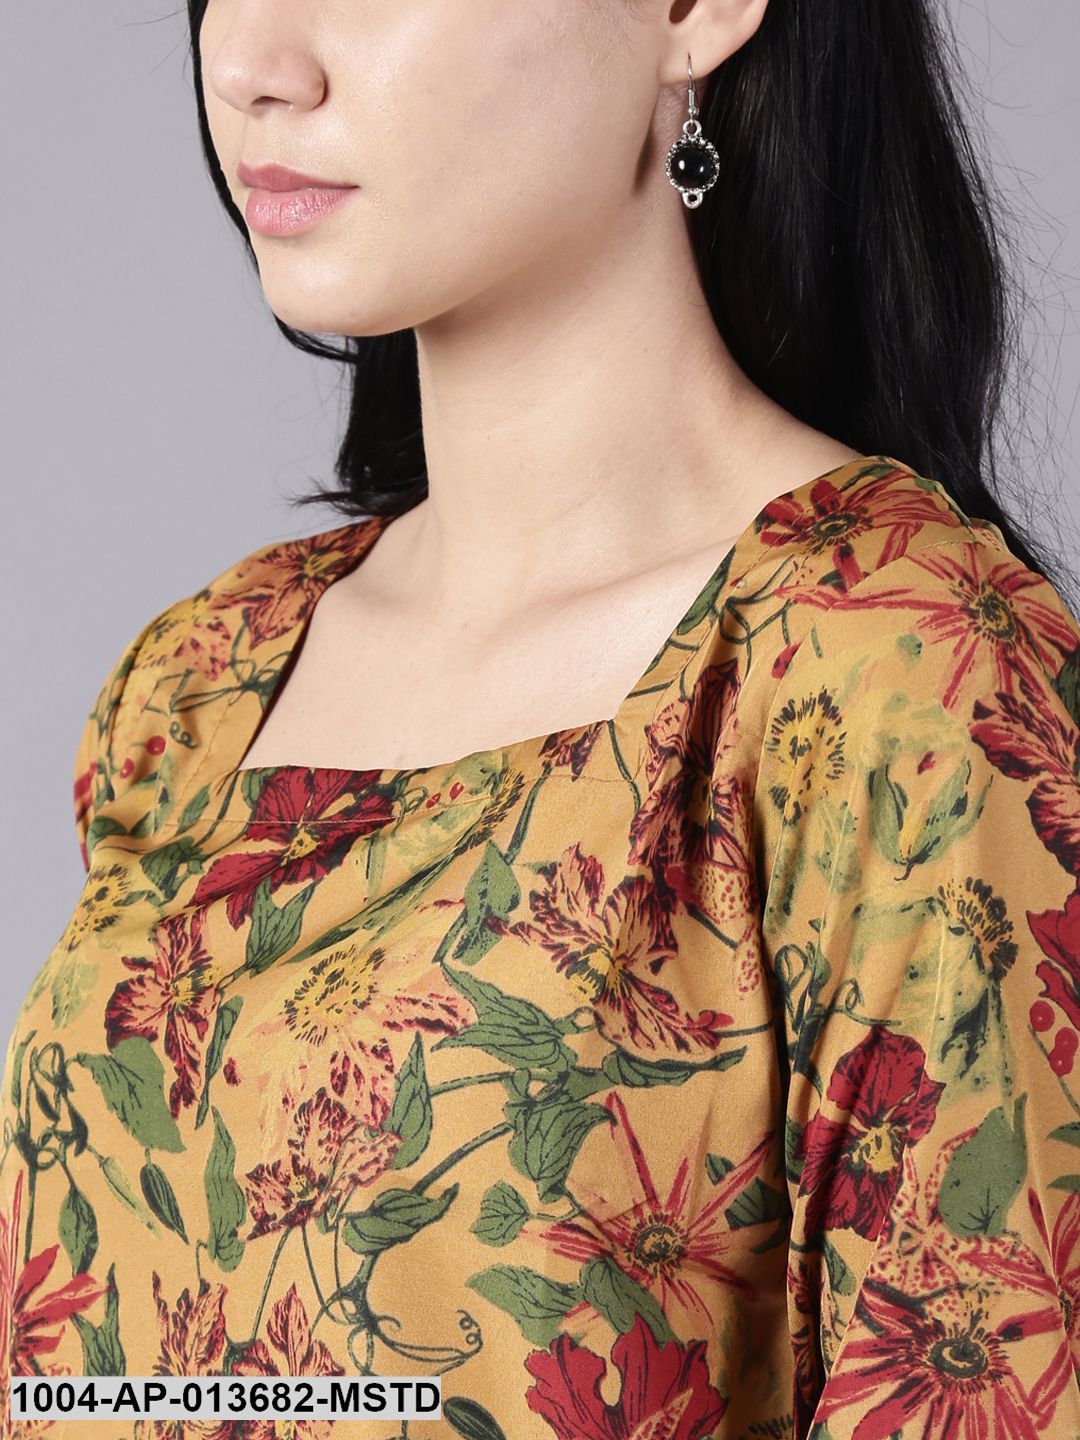 Mustard yellow Casual Printed Square Neck Top